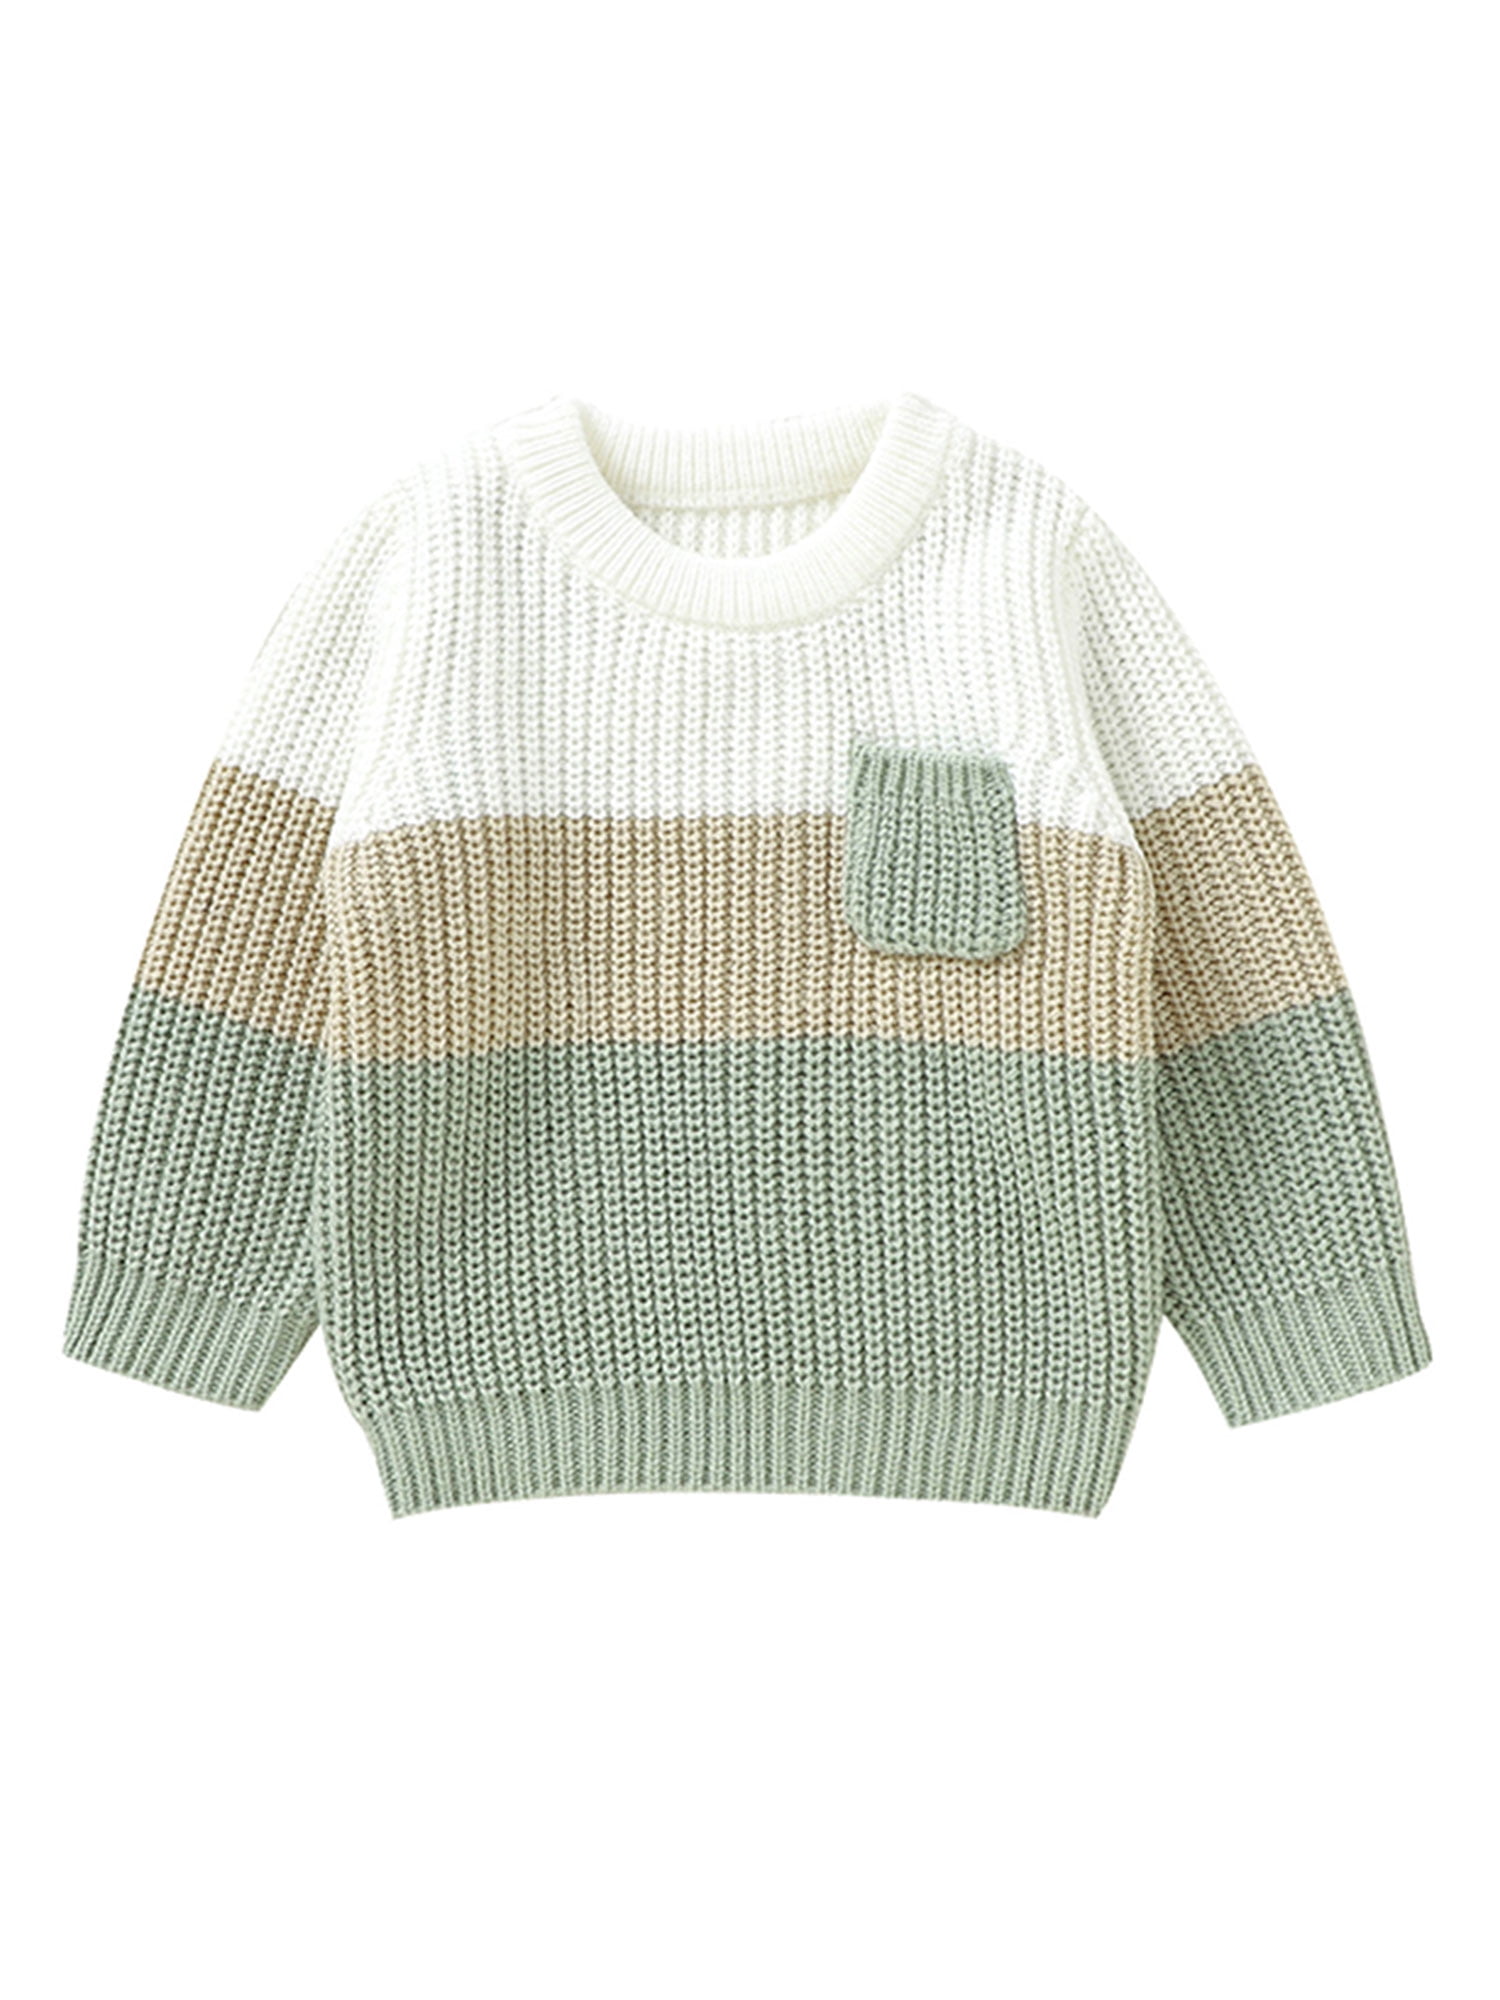 GXFC Toddler Fall Sweaters Clothes for Boys Girls 6M 1T 2T 3T Kids Long ...